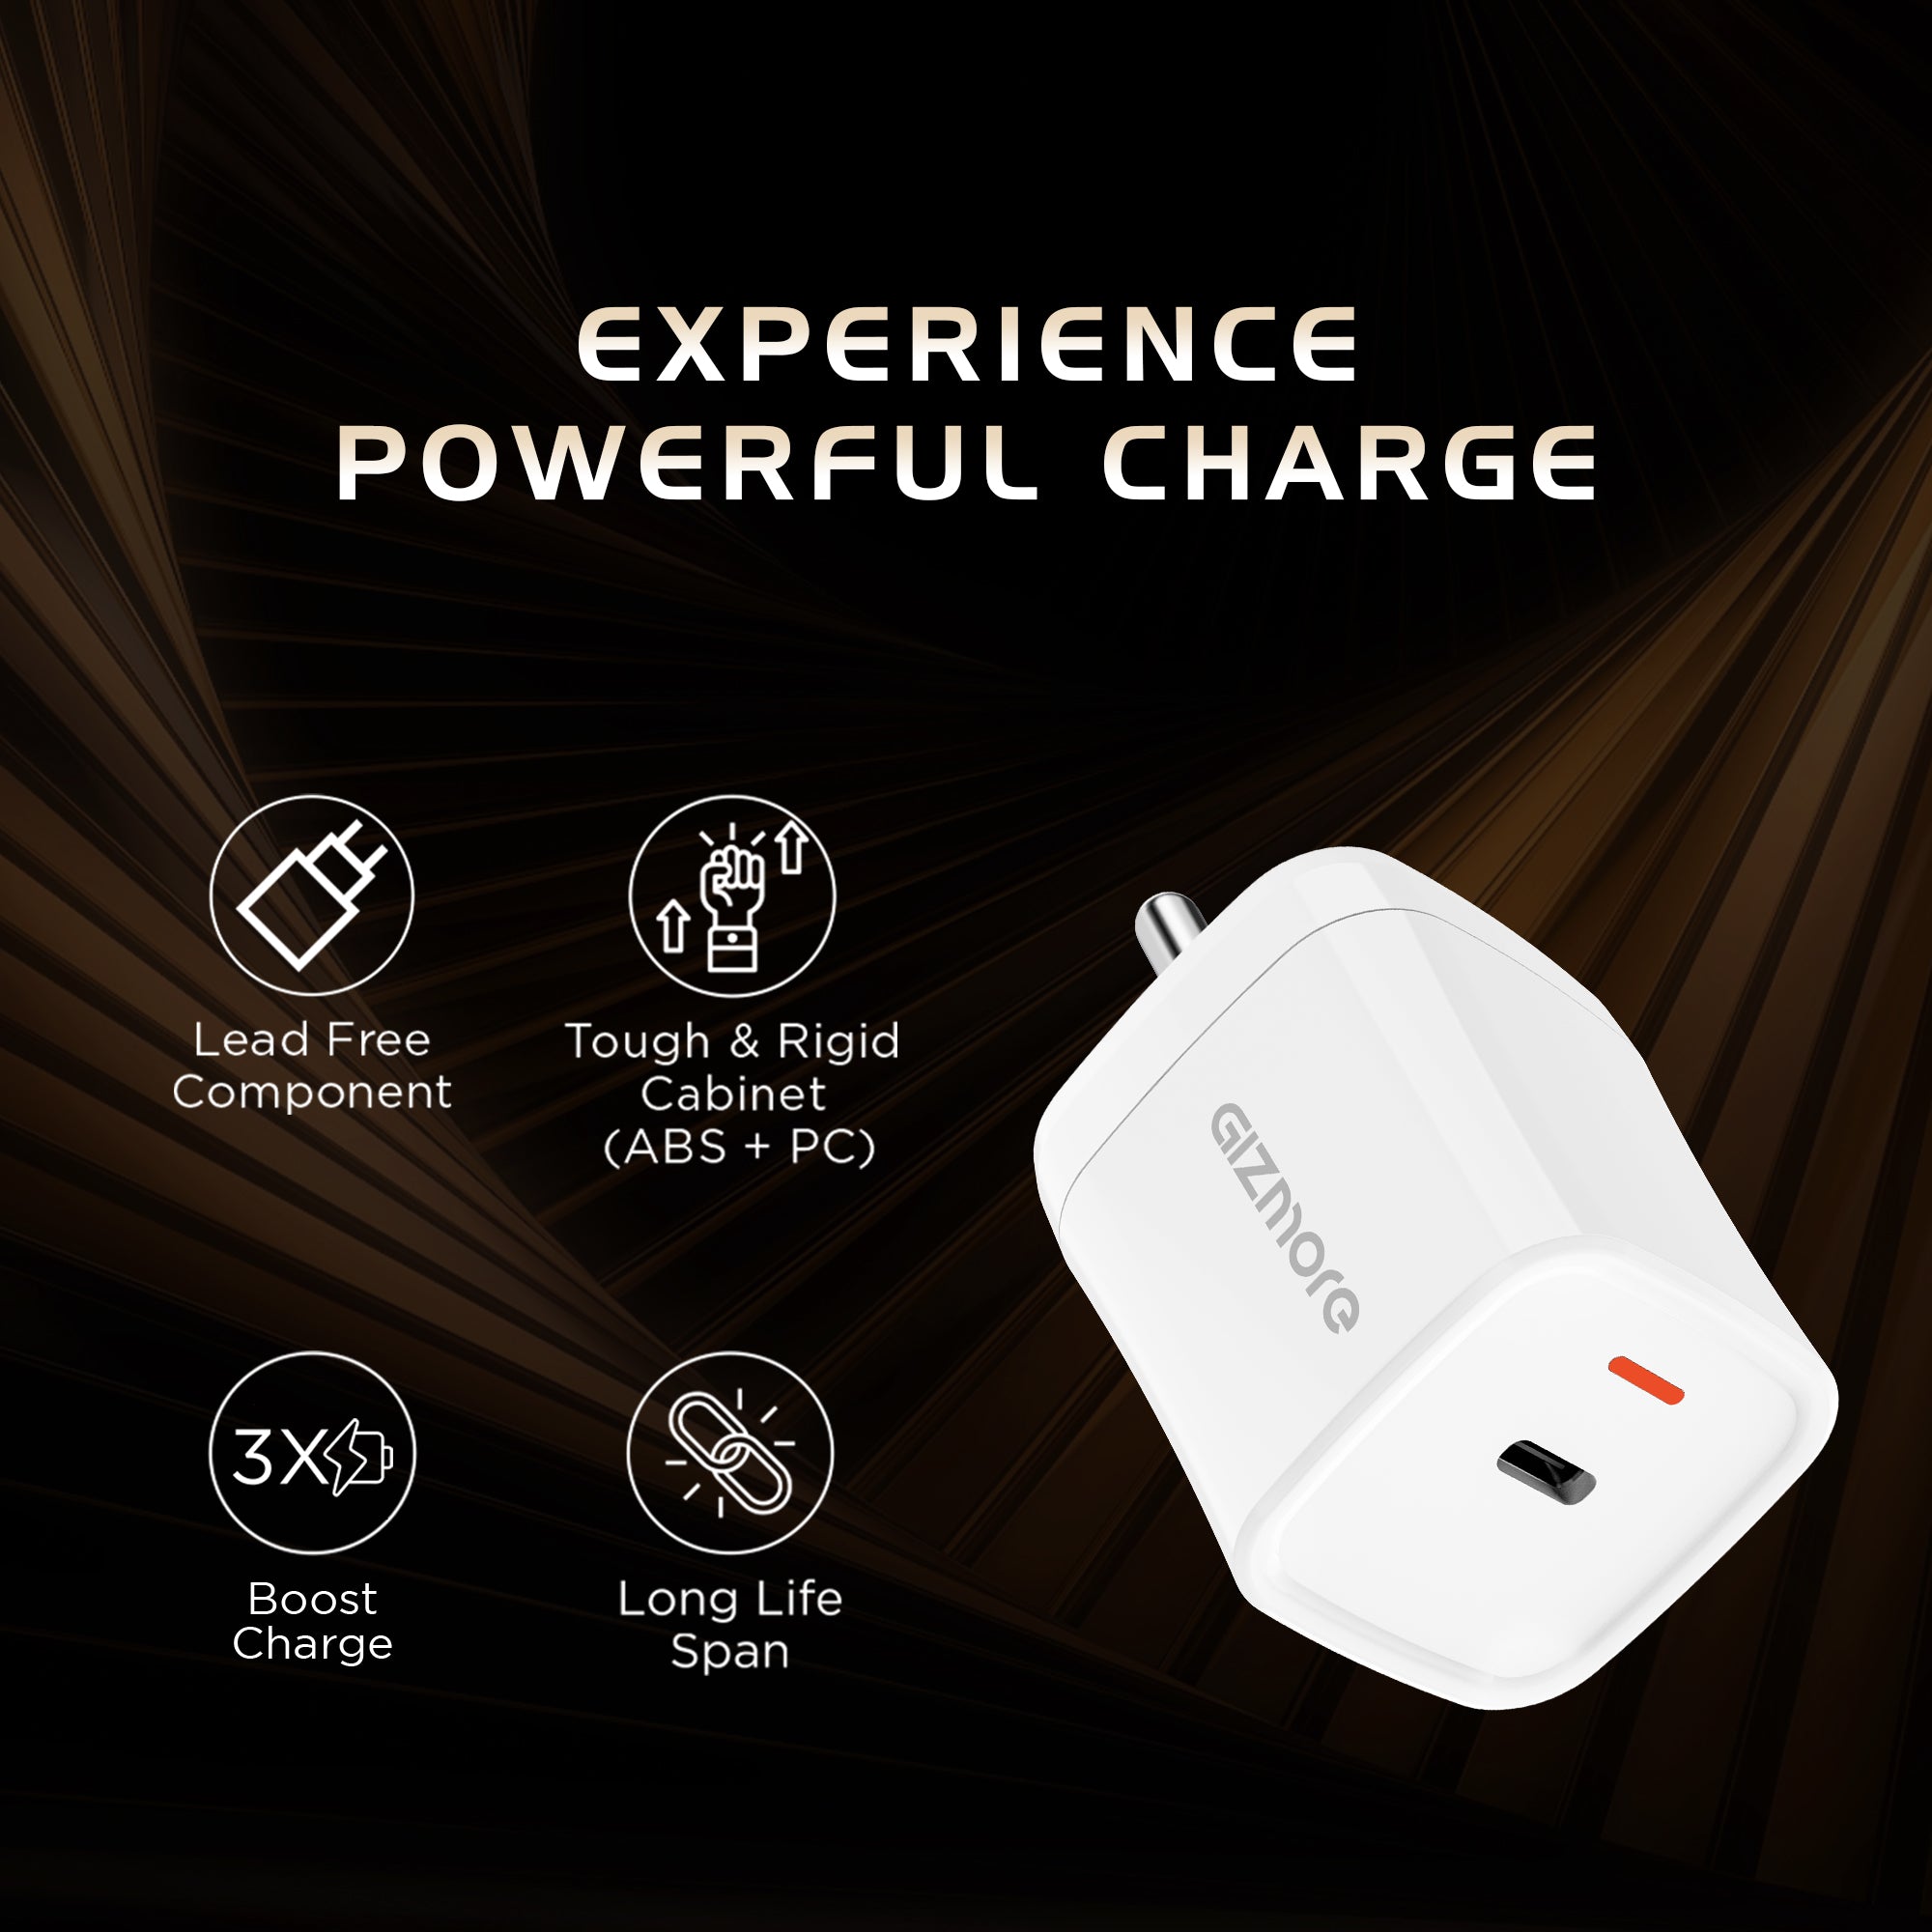 GIZMORE PA625 25W PD/PPS Type-C Super-Fast Charger Compatible with iPhone, Android and Other PD Devices, Versatile Protocol